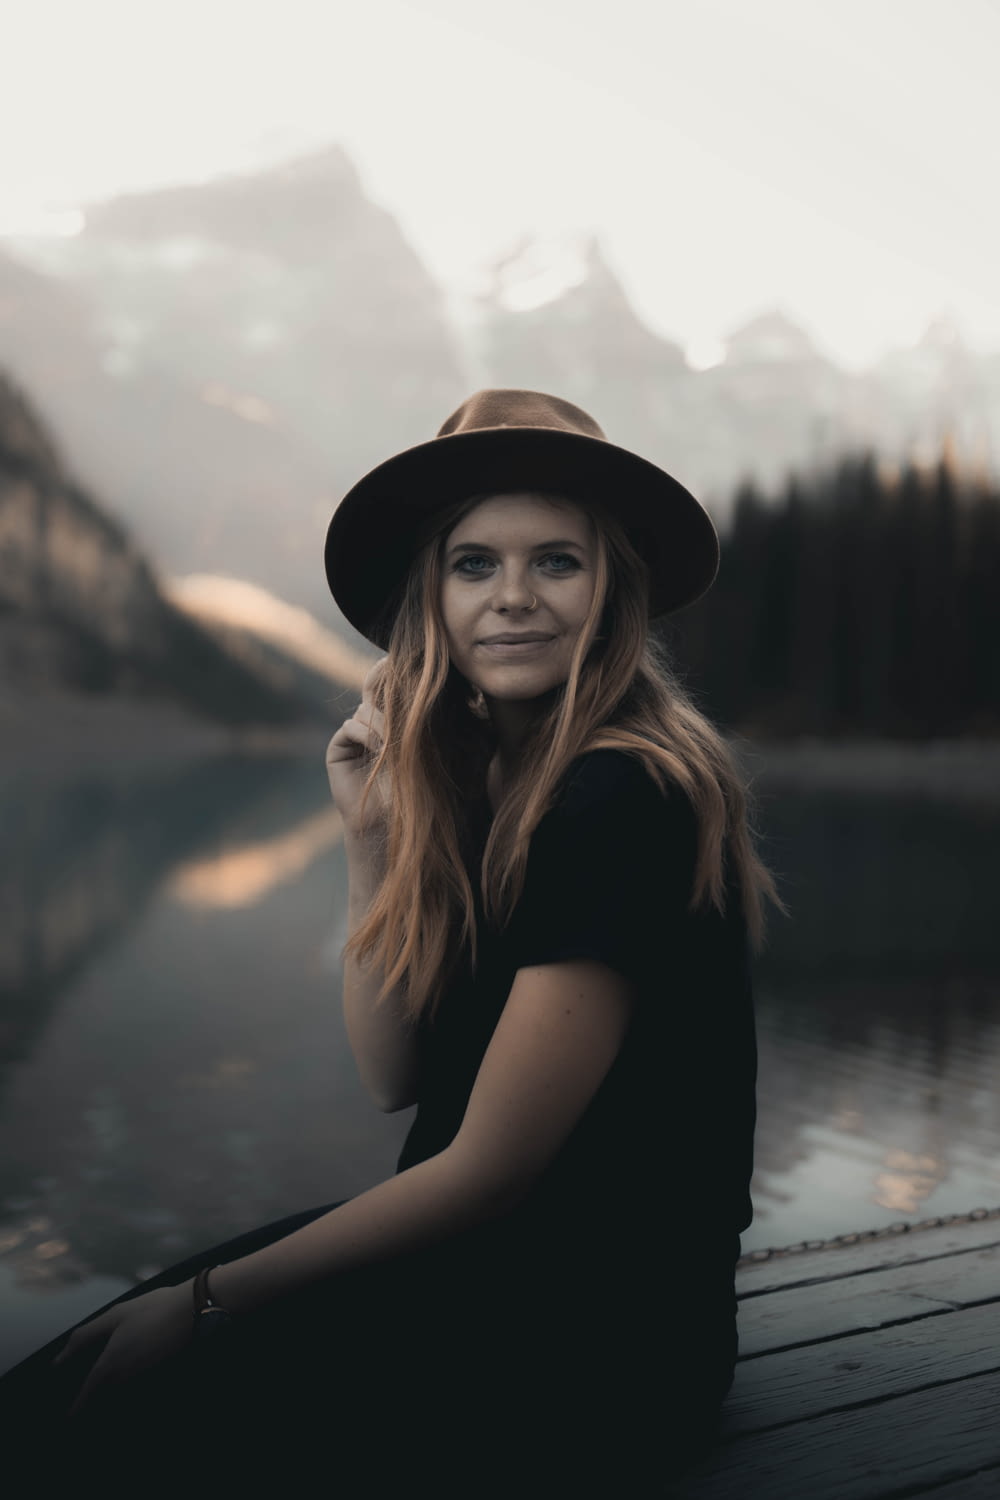 woman in black shirt and black hat standing near lake during daytime